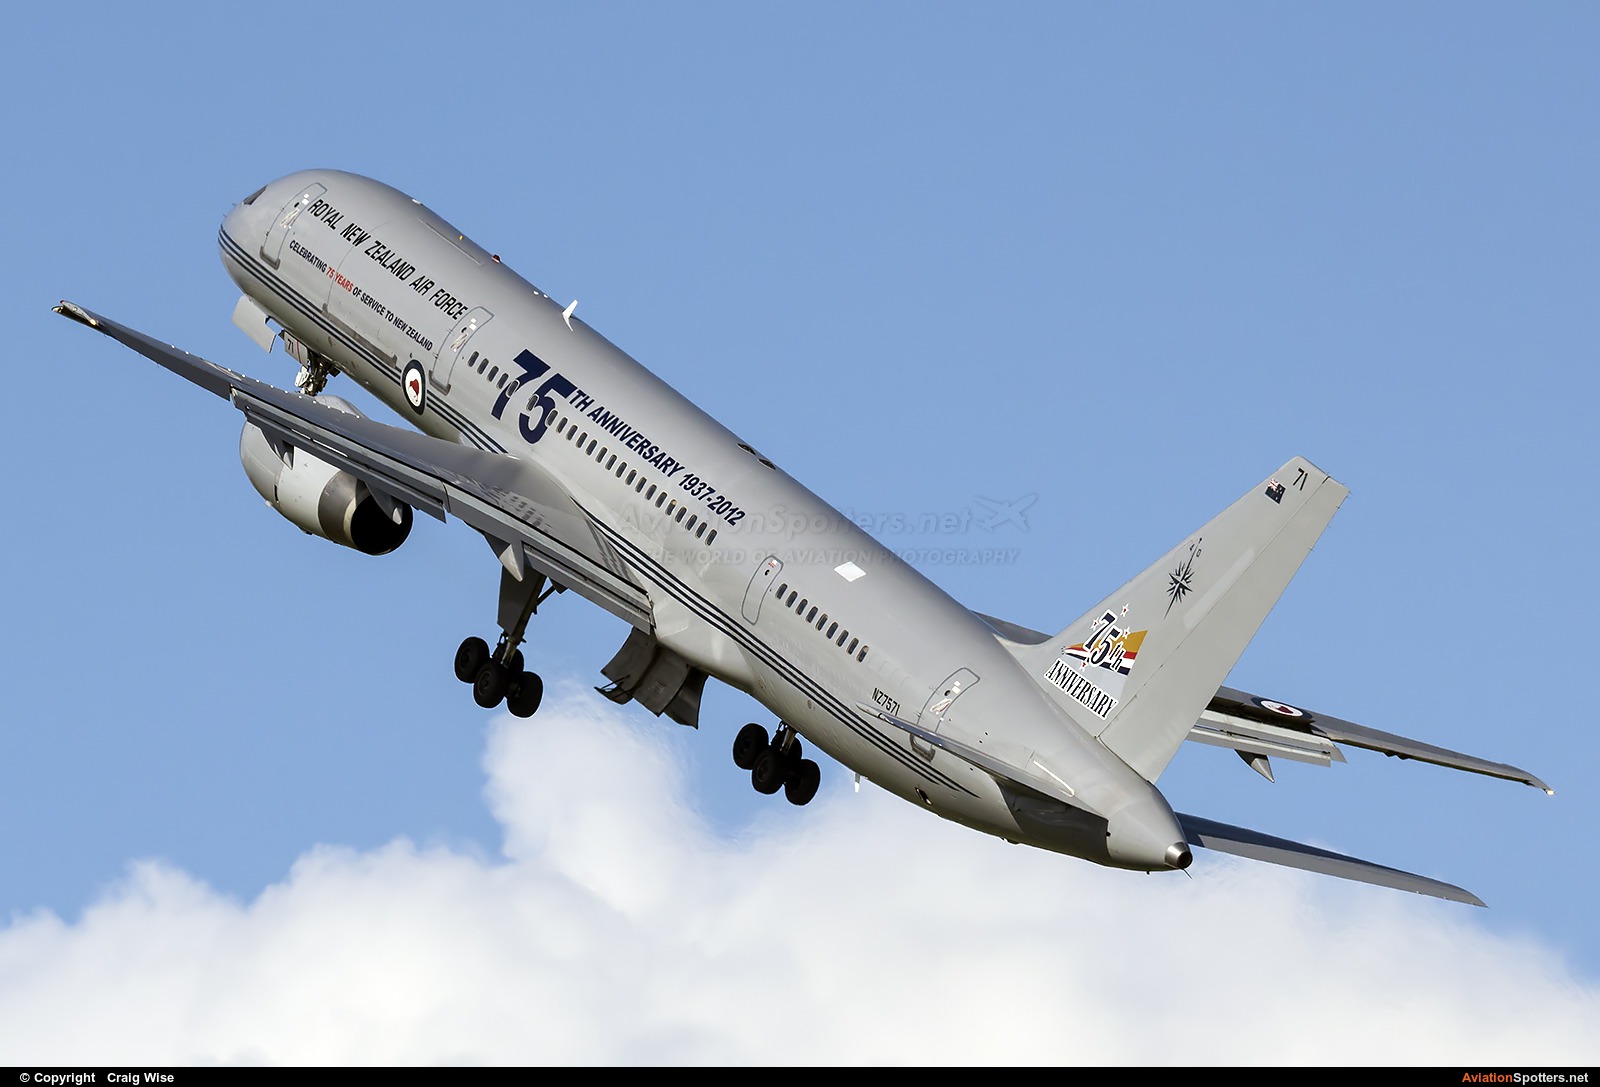 New Zealand - Air Force  -  757-200  (NZ7571) By Craig Wise (Tigger Bounce)